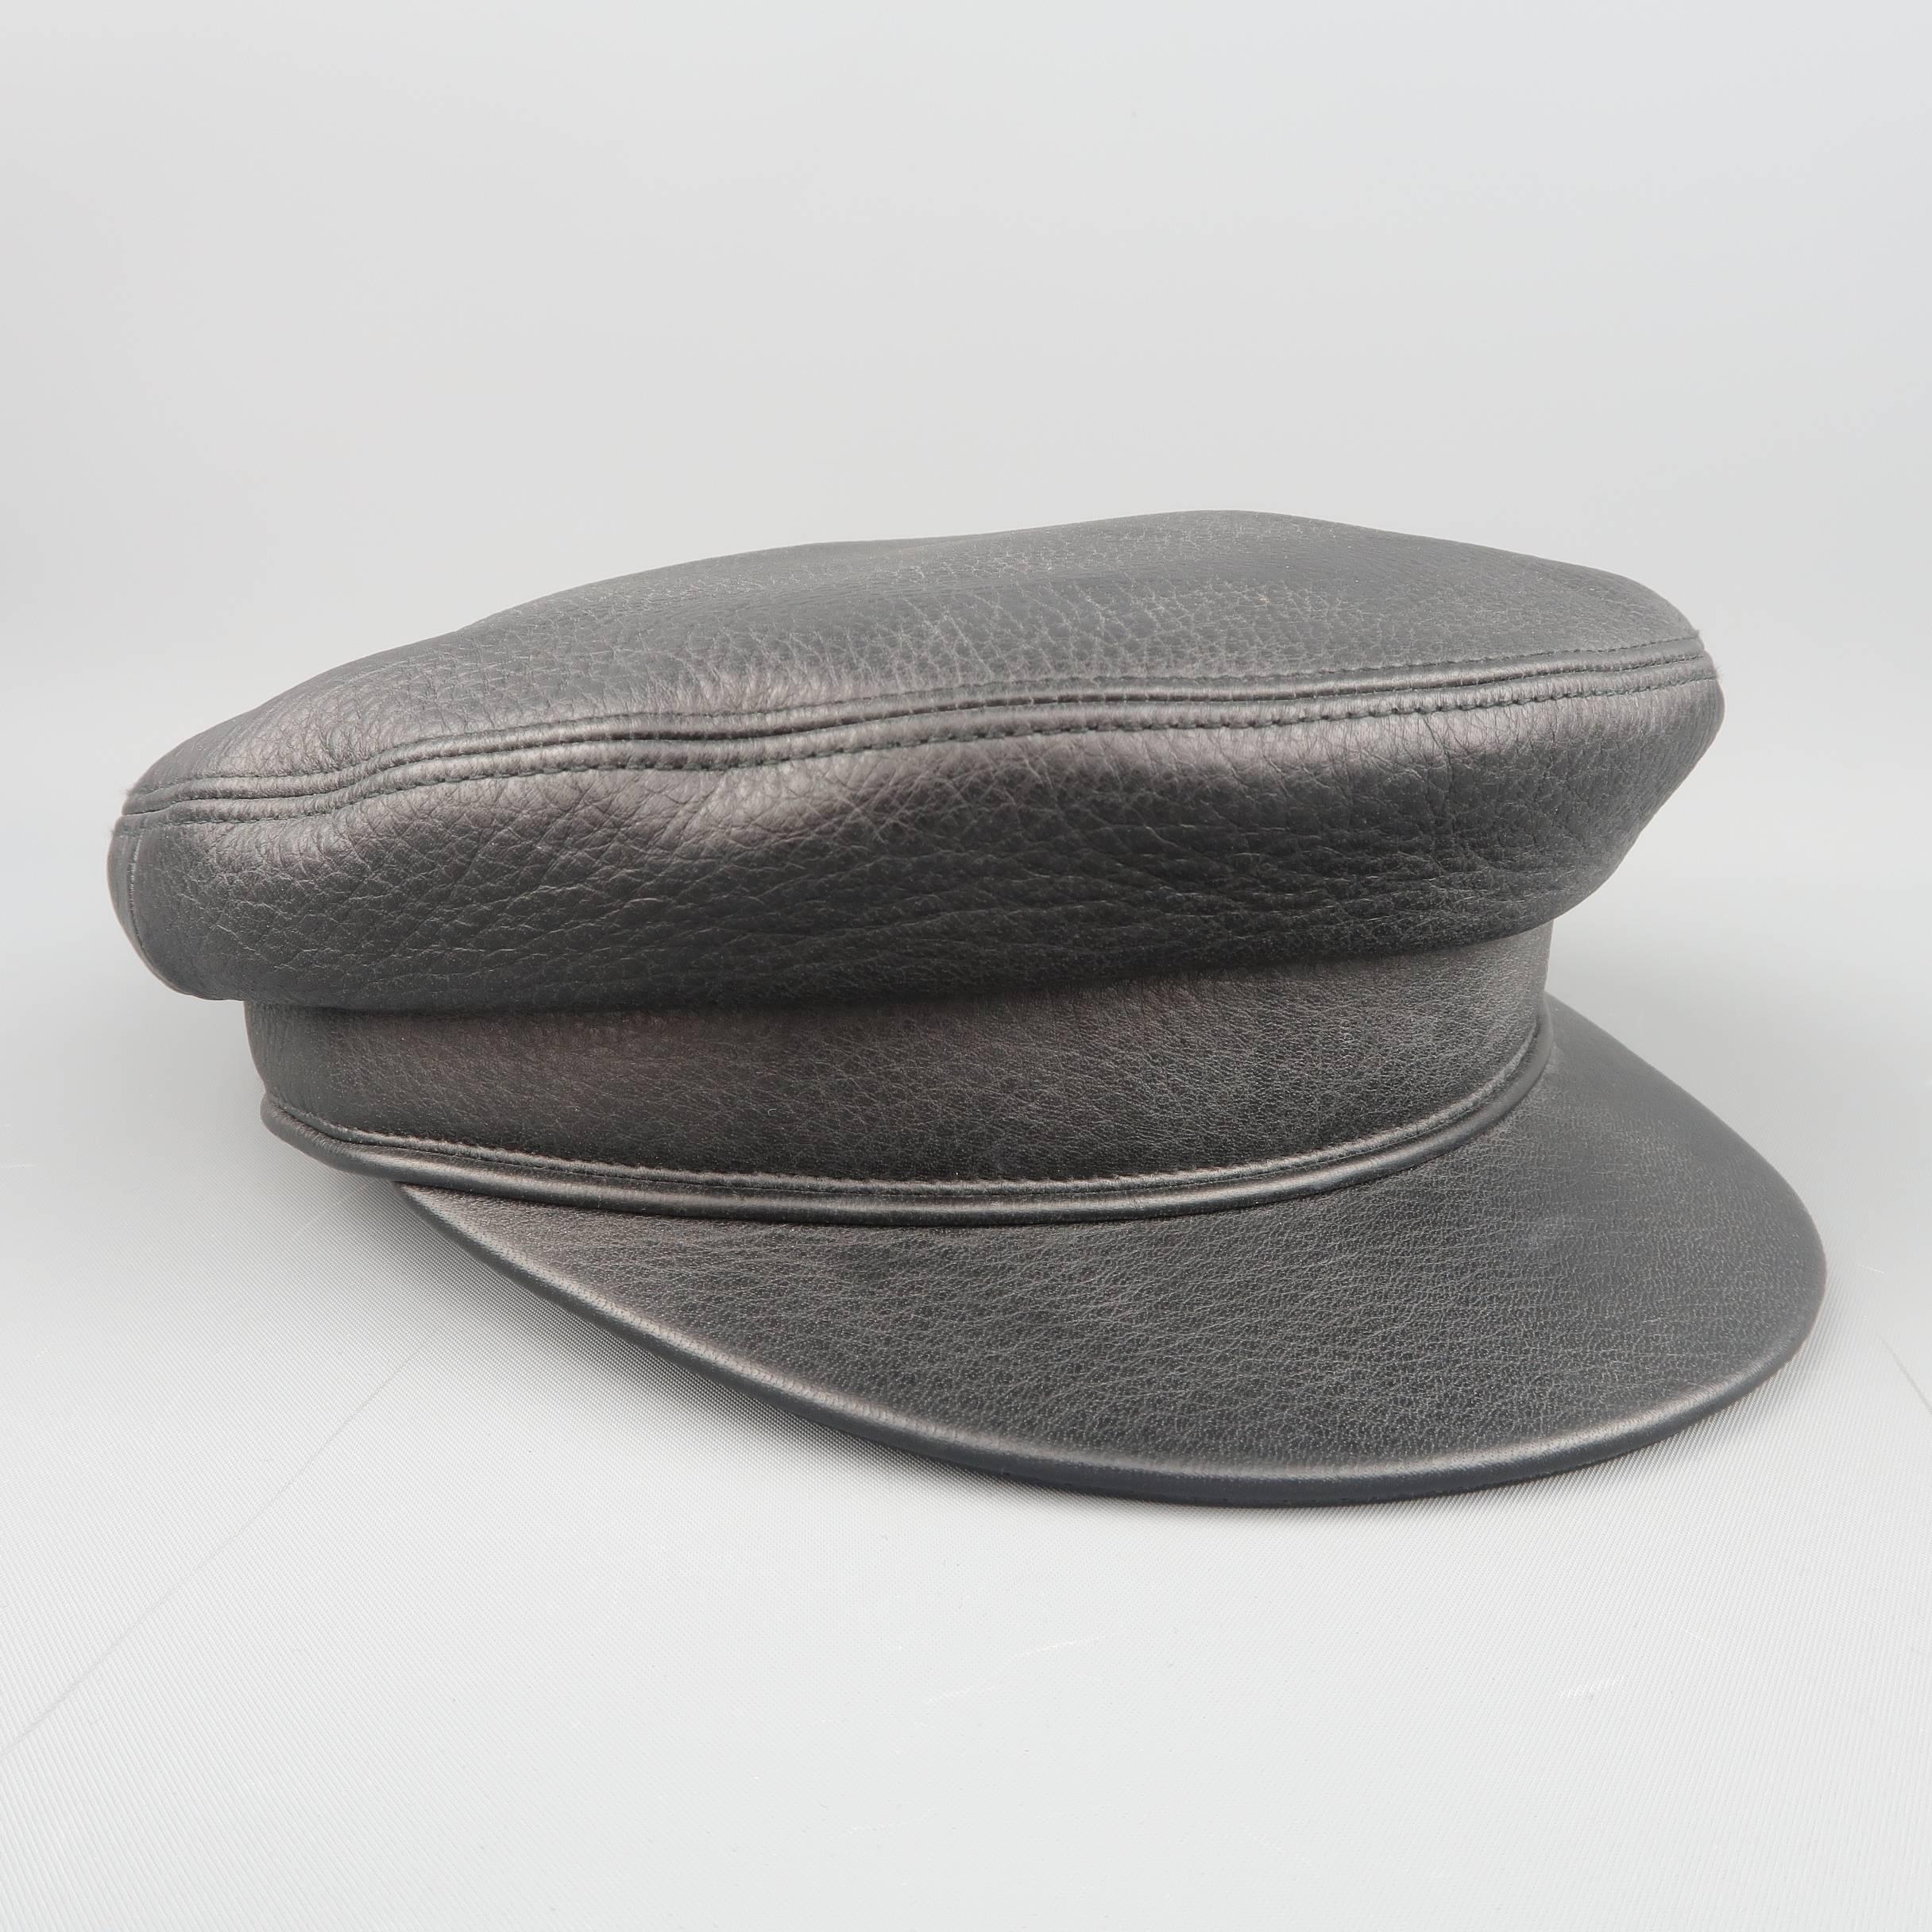 HERMES biker style cap comes in deer skin leather and features a beret top, thick band and small brim. Never worn. With original box. Made in France.
 
New without Tags.
Marked: EU 57
 
Measurements:
 
Opening: 7 x 7.5 in.
Brim: 2.25 in.
Height: